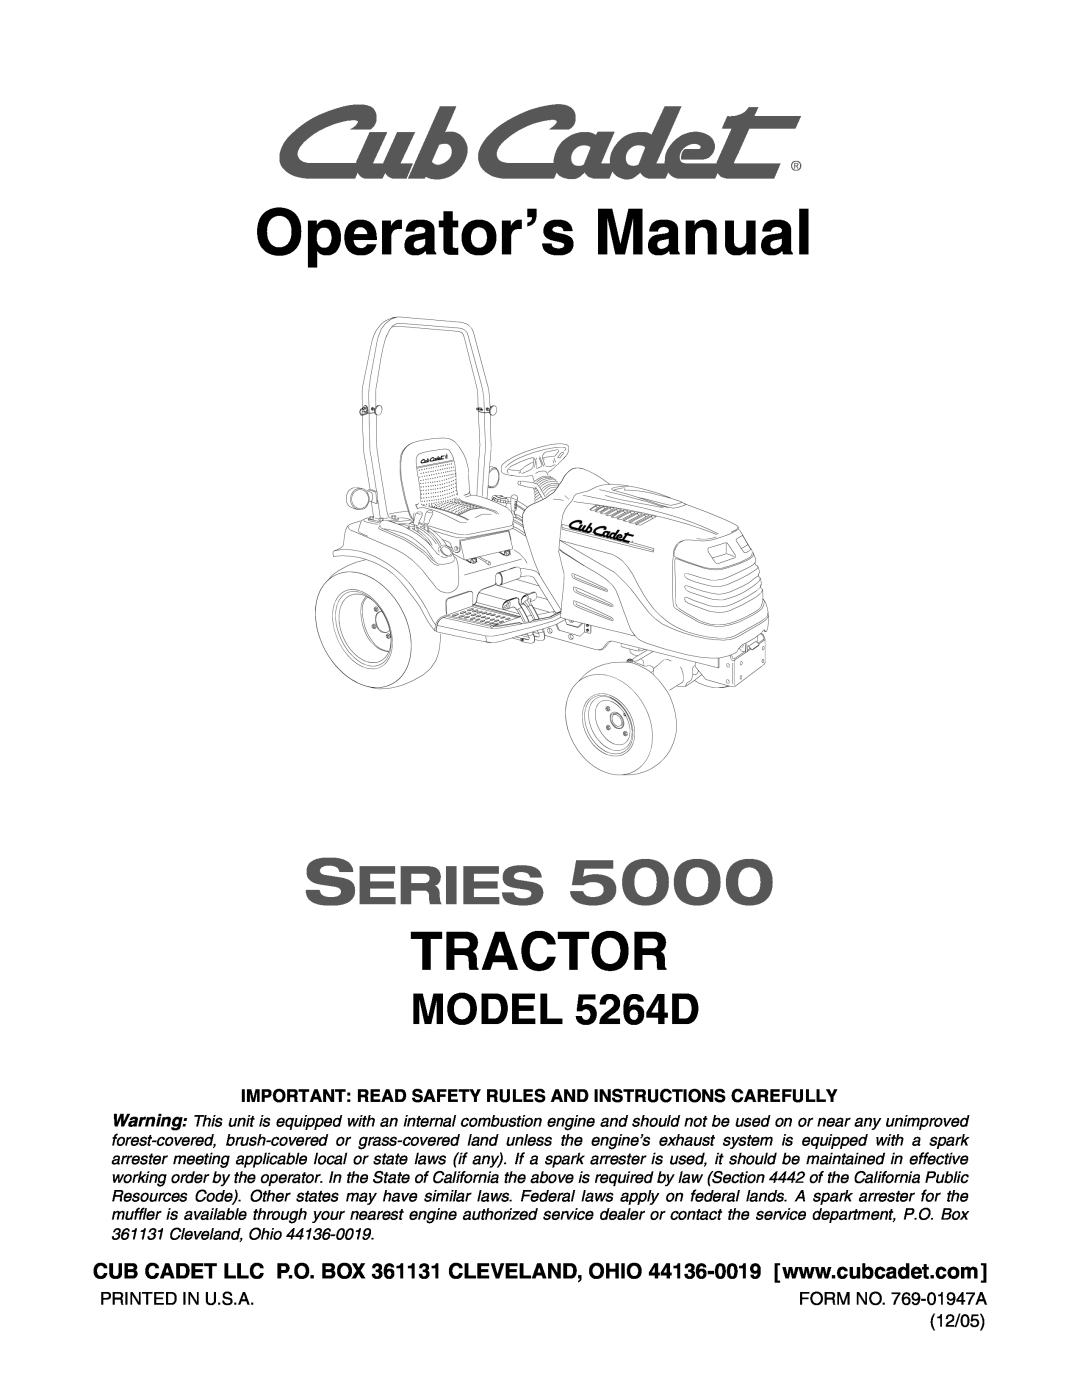 Cub Cadet 5264D manual Important Read Safety Rules And Instructions Carefully, Operator’s Manual, Series, Tractor 